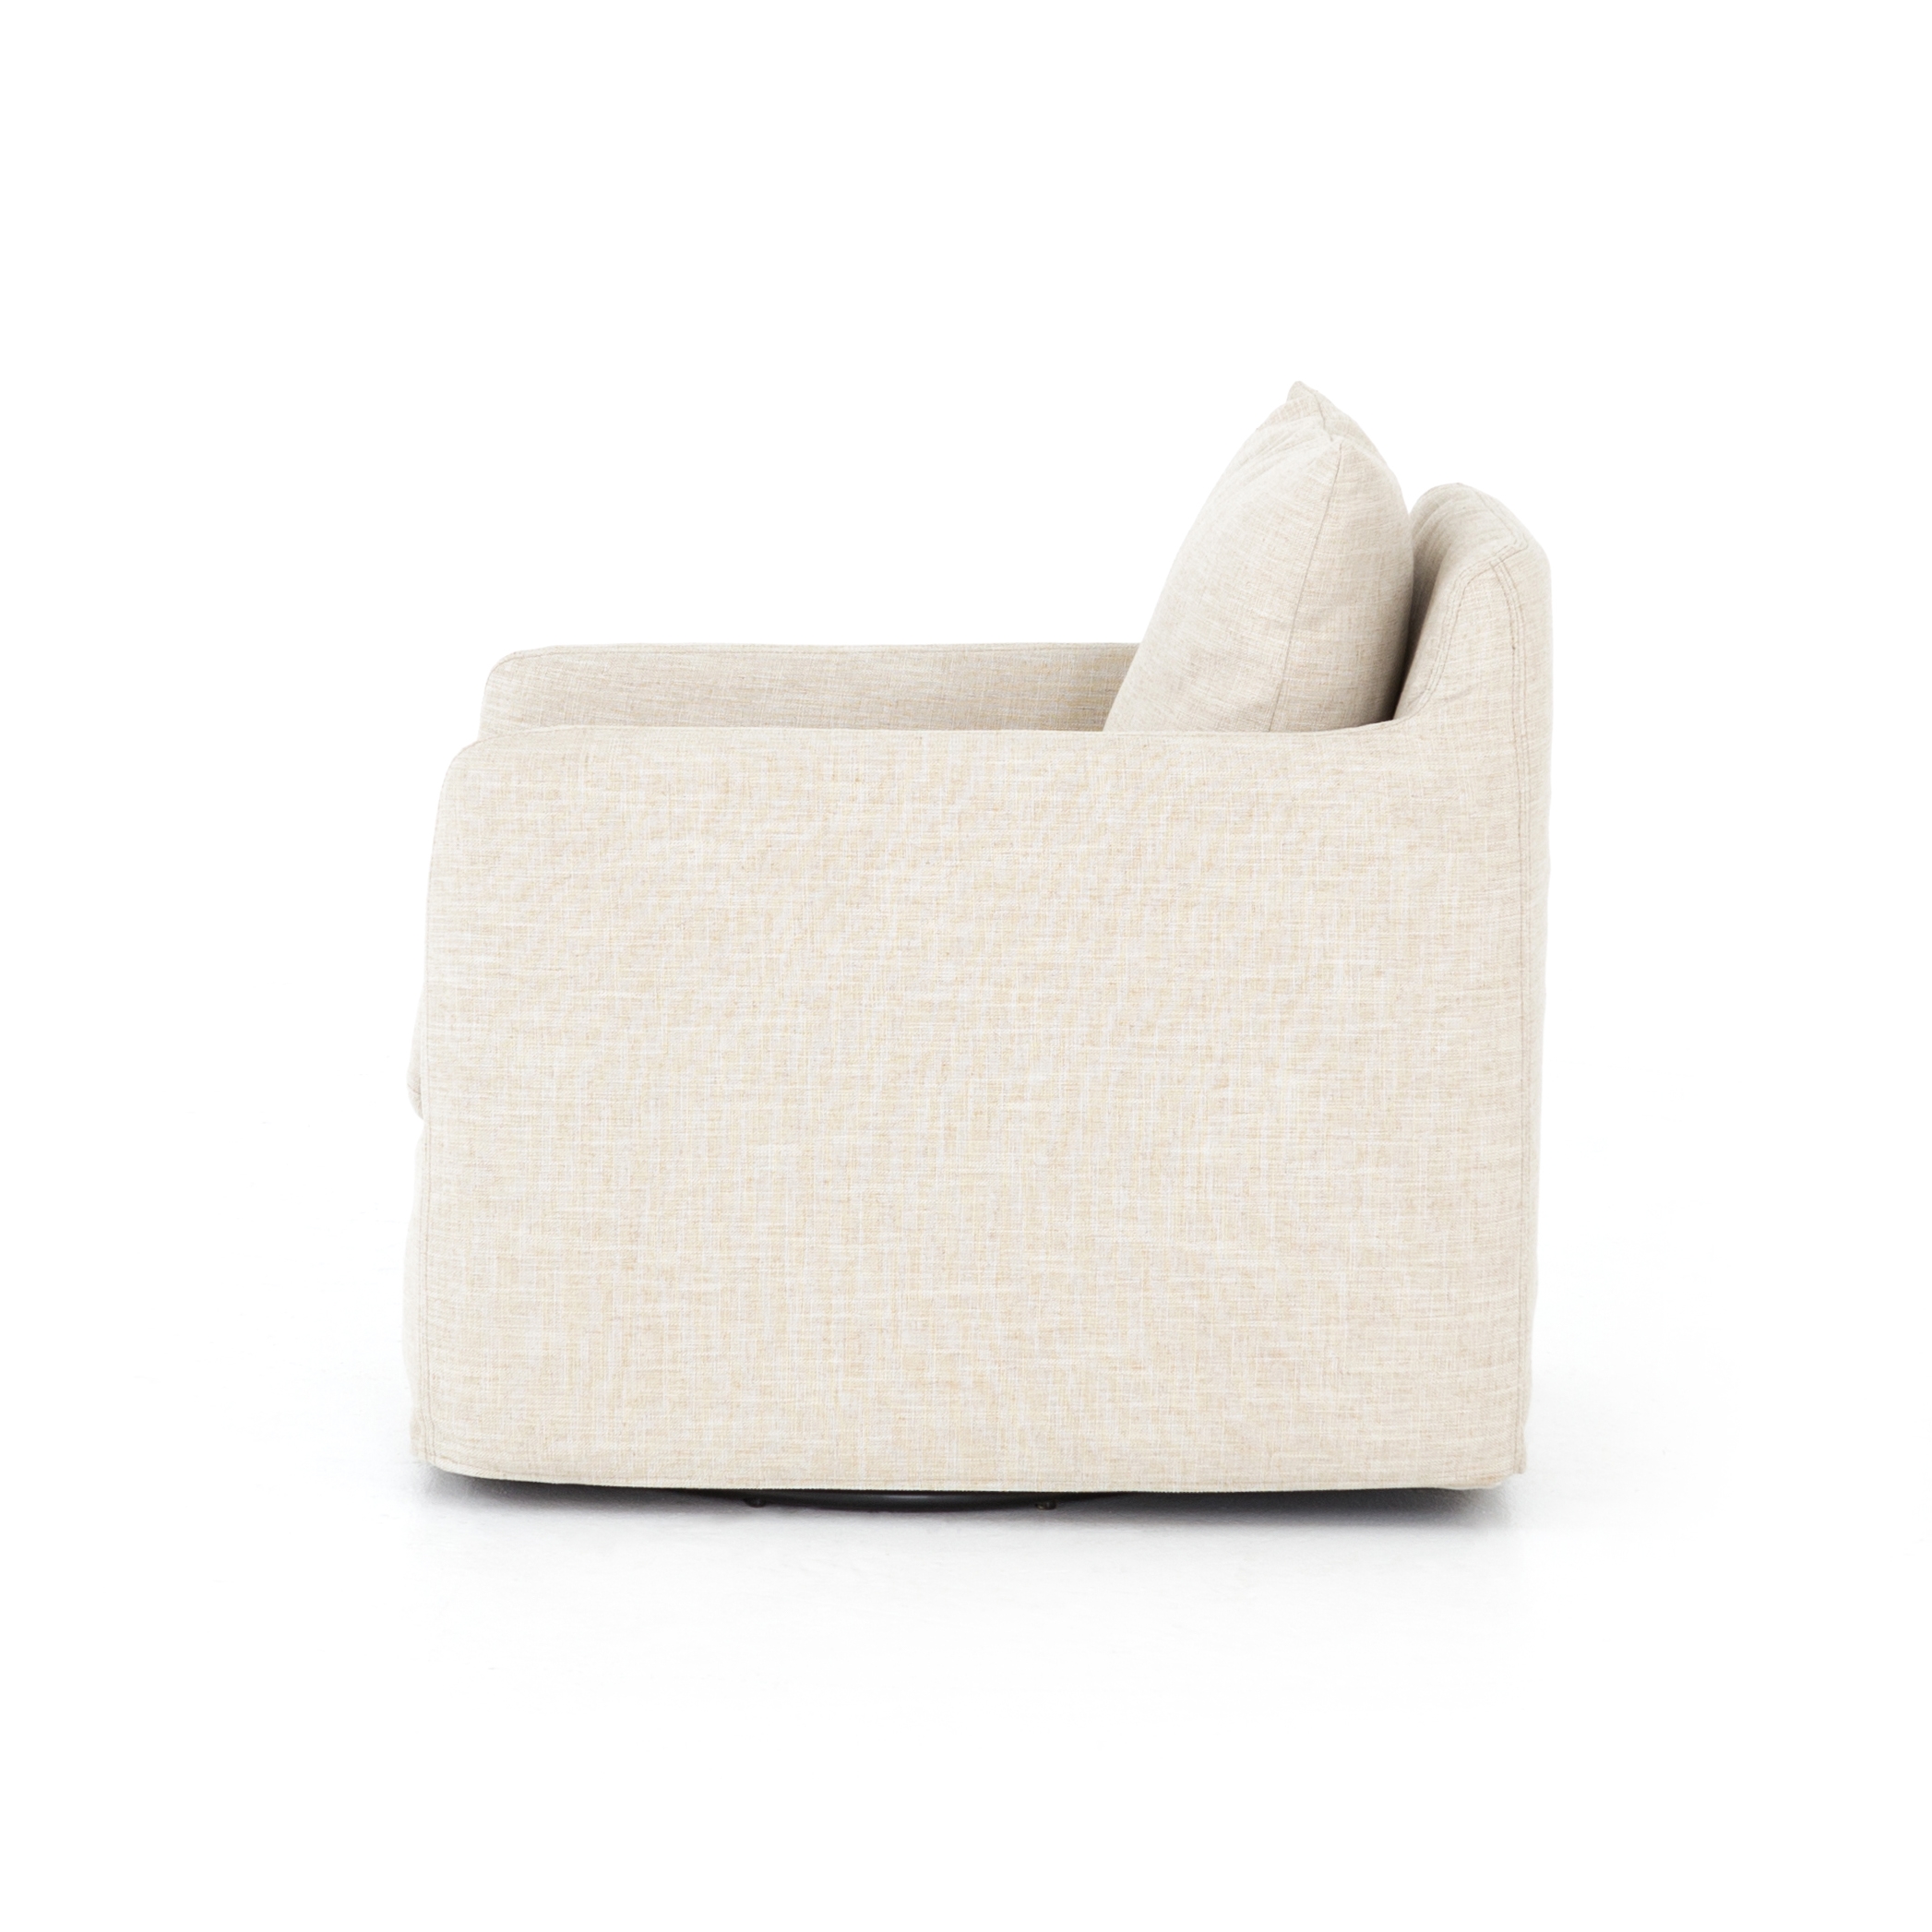 Banks Swivel Chair-Cambric Ivory - Image 5